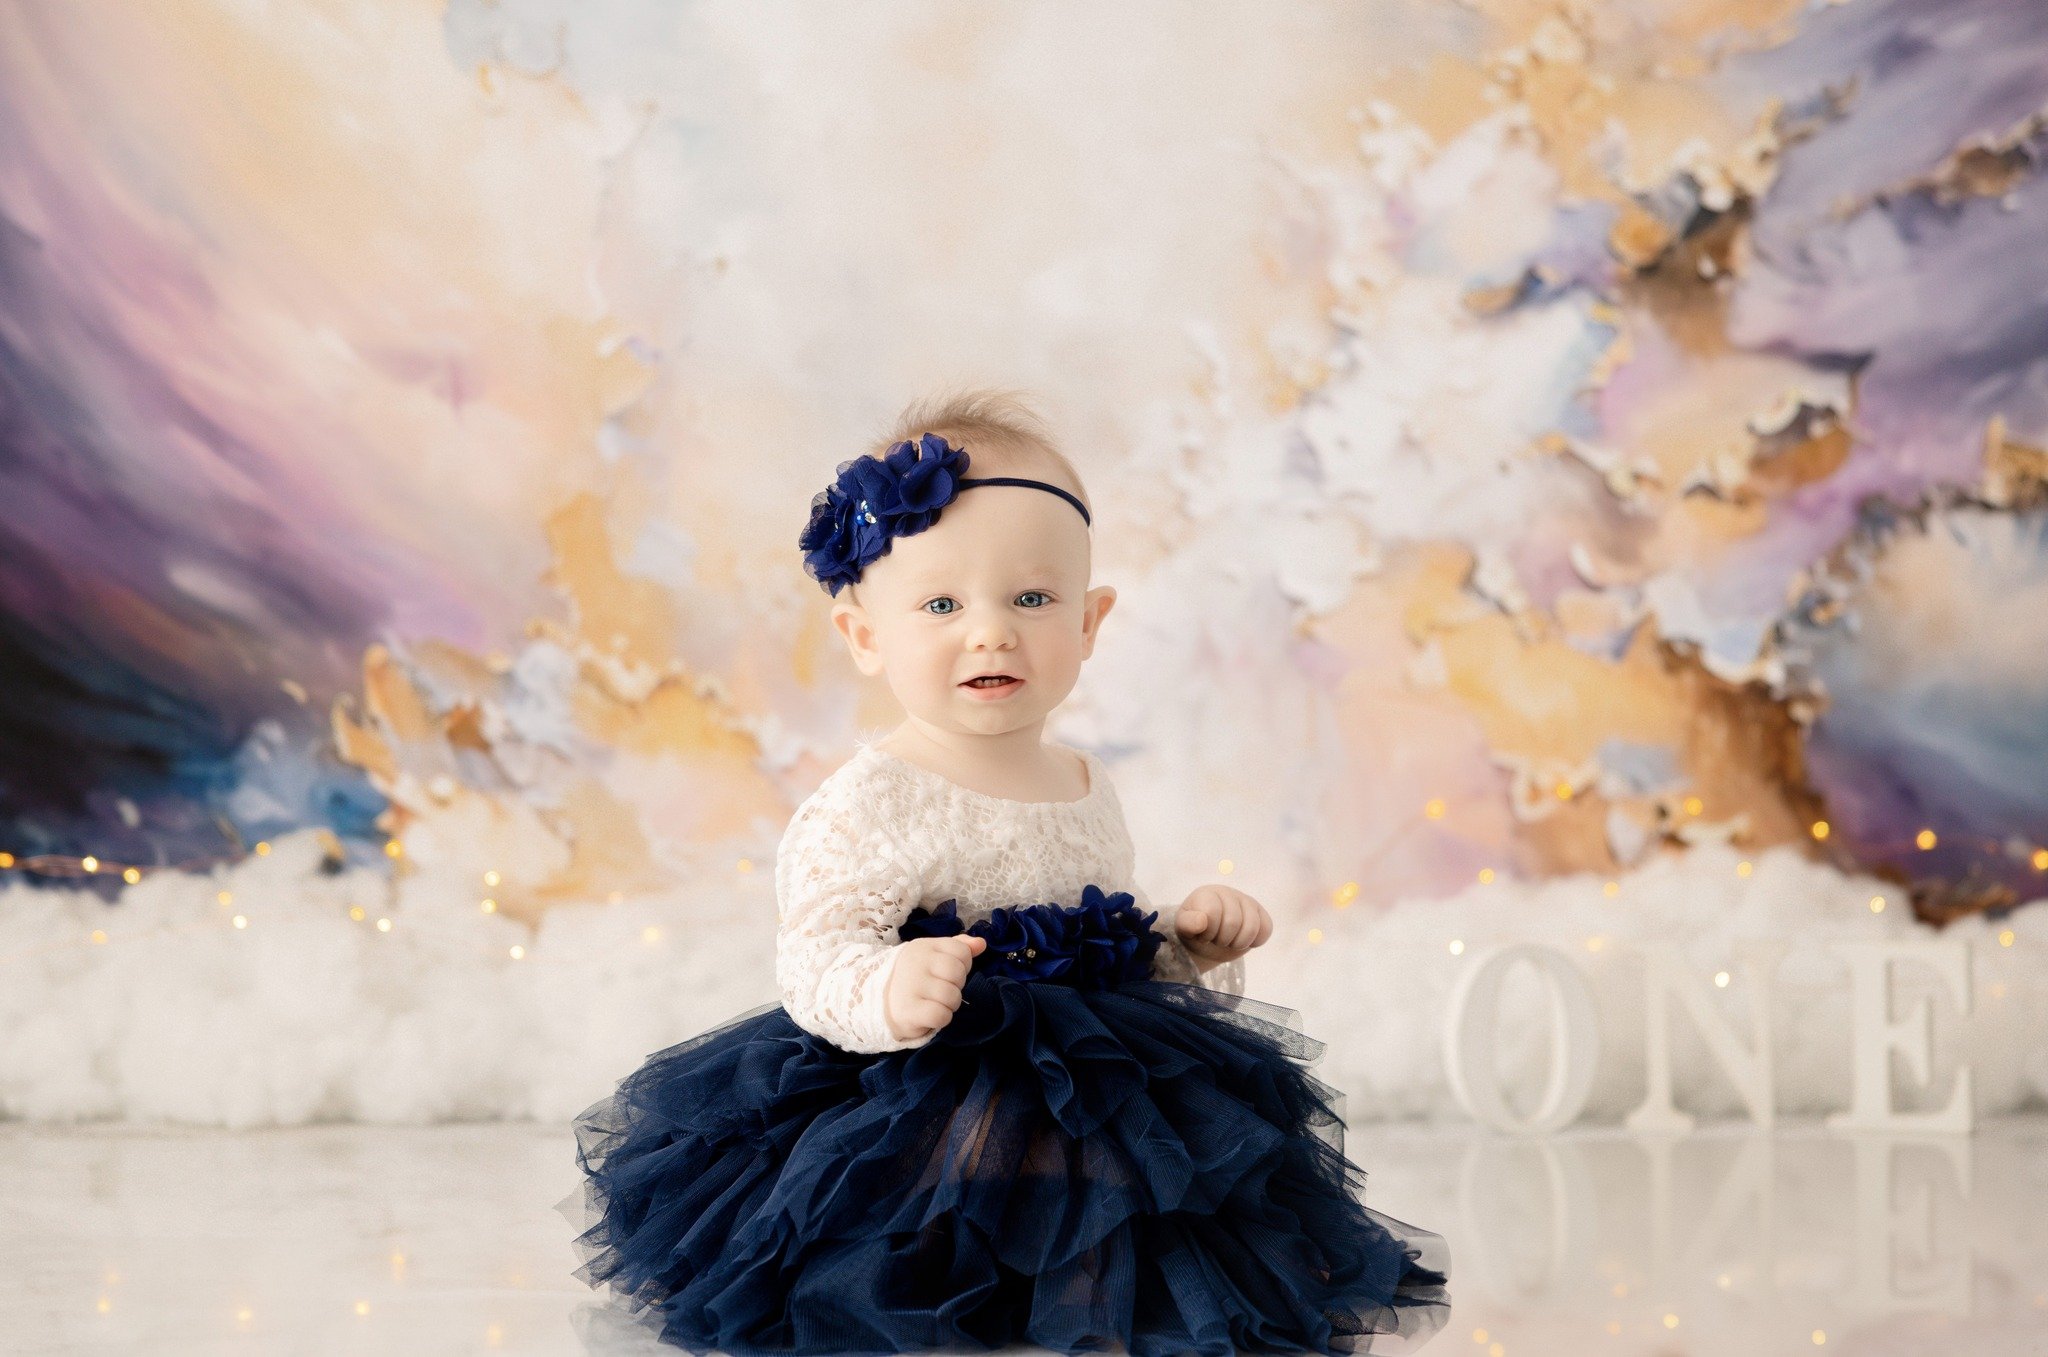 It's fri-yay! 
Violet came to the studio for her smash cake session. We customized the backdrop that goes with her name. She was not sure how to feel about being in front of the camera but she gave me some cute smiles, and had fun splashing in the tu